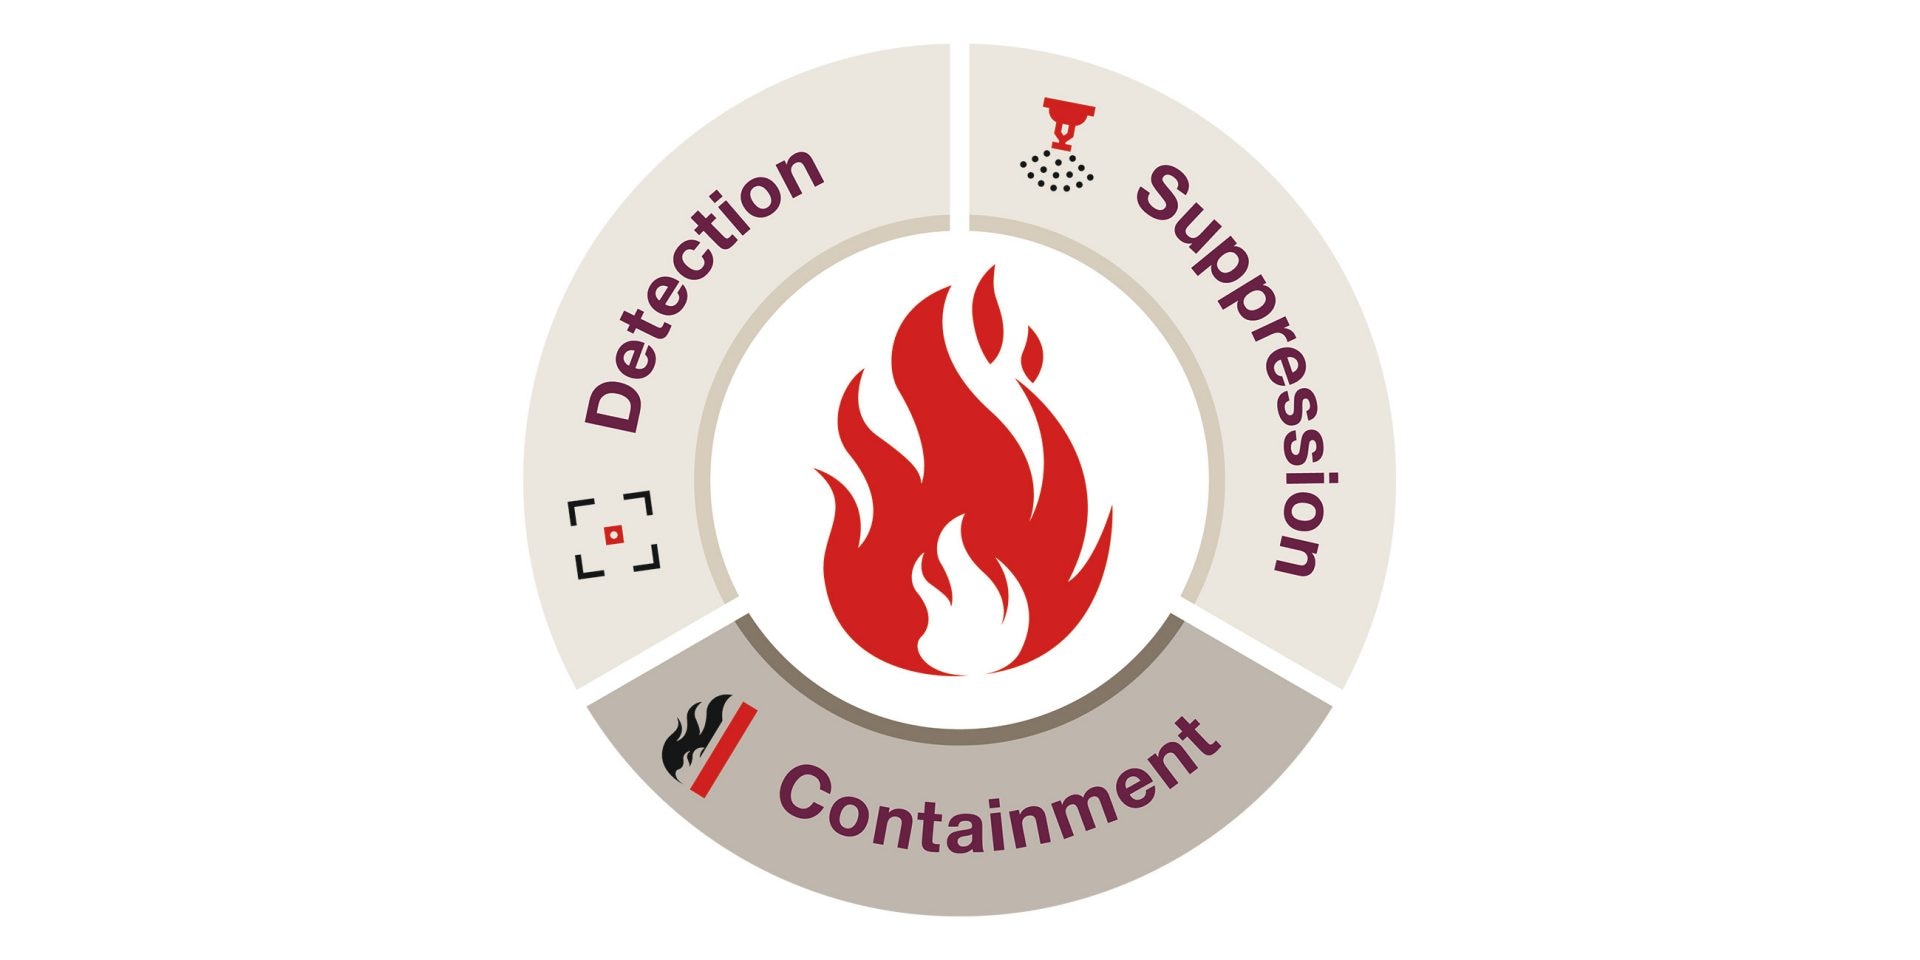 Active fire protection - including detection (e.g. alarms) and suppression (e.g. sprinklers) should also be combined with containment which can be achieved with passive fire protection.